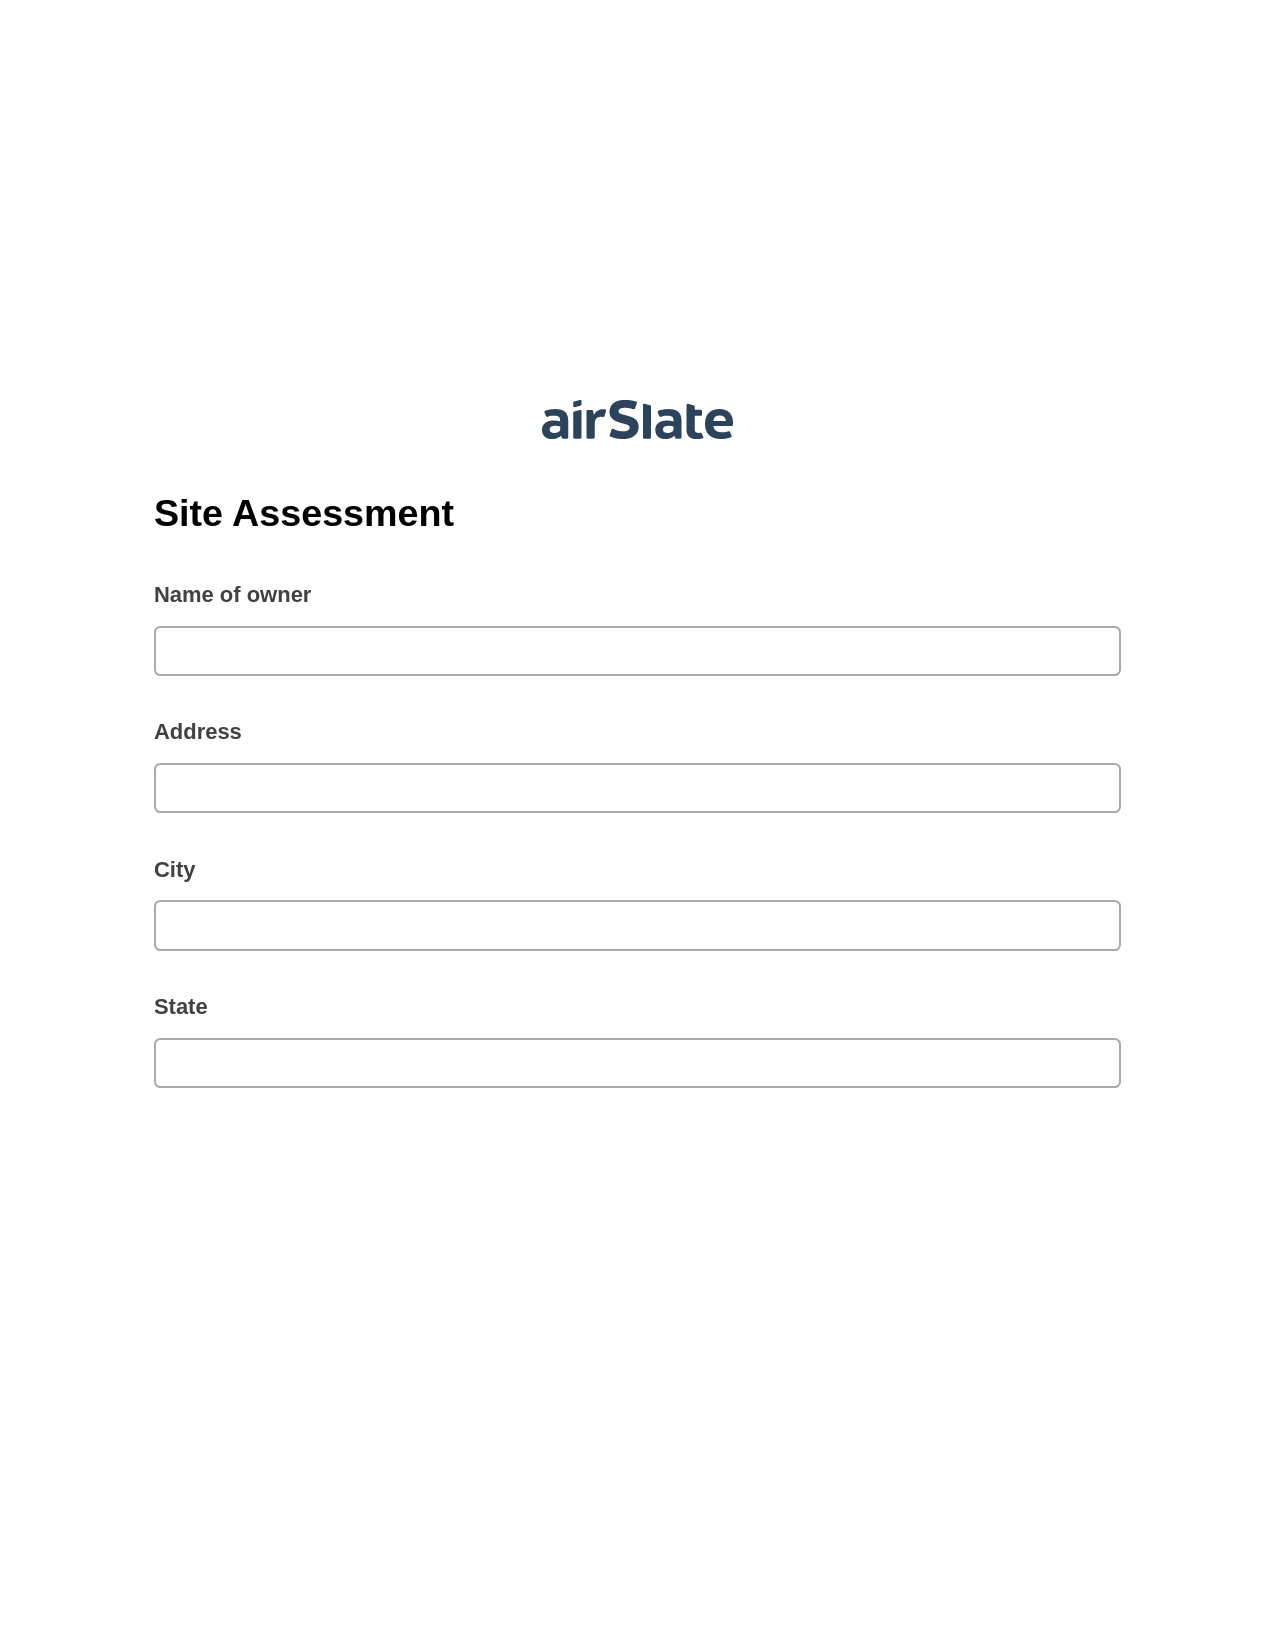 Site Assessment Pre-fill from Salesforce Record Bot, Slack Notification Bot, OneDrive Bot